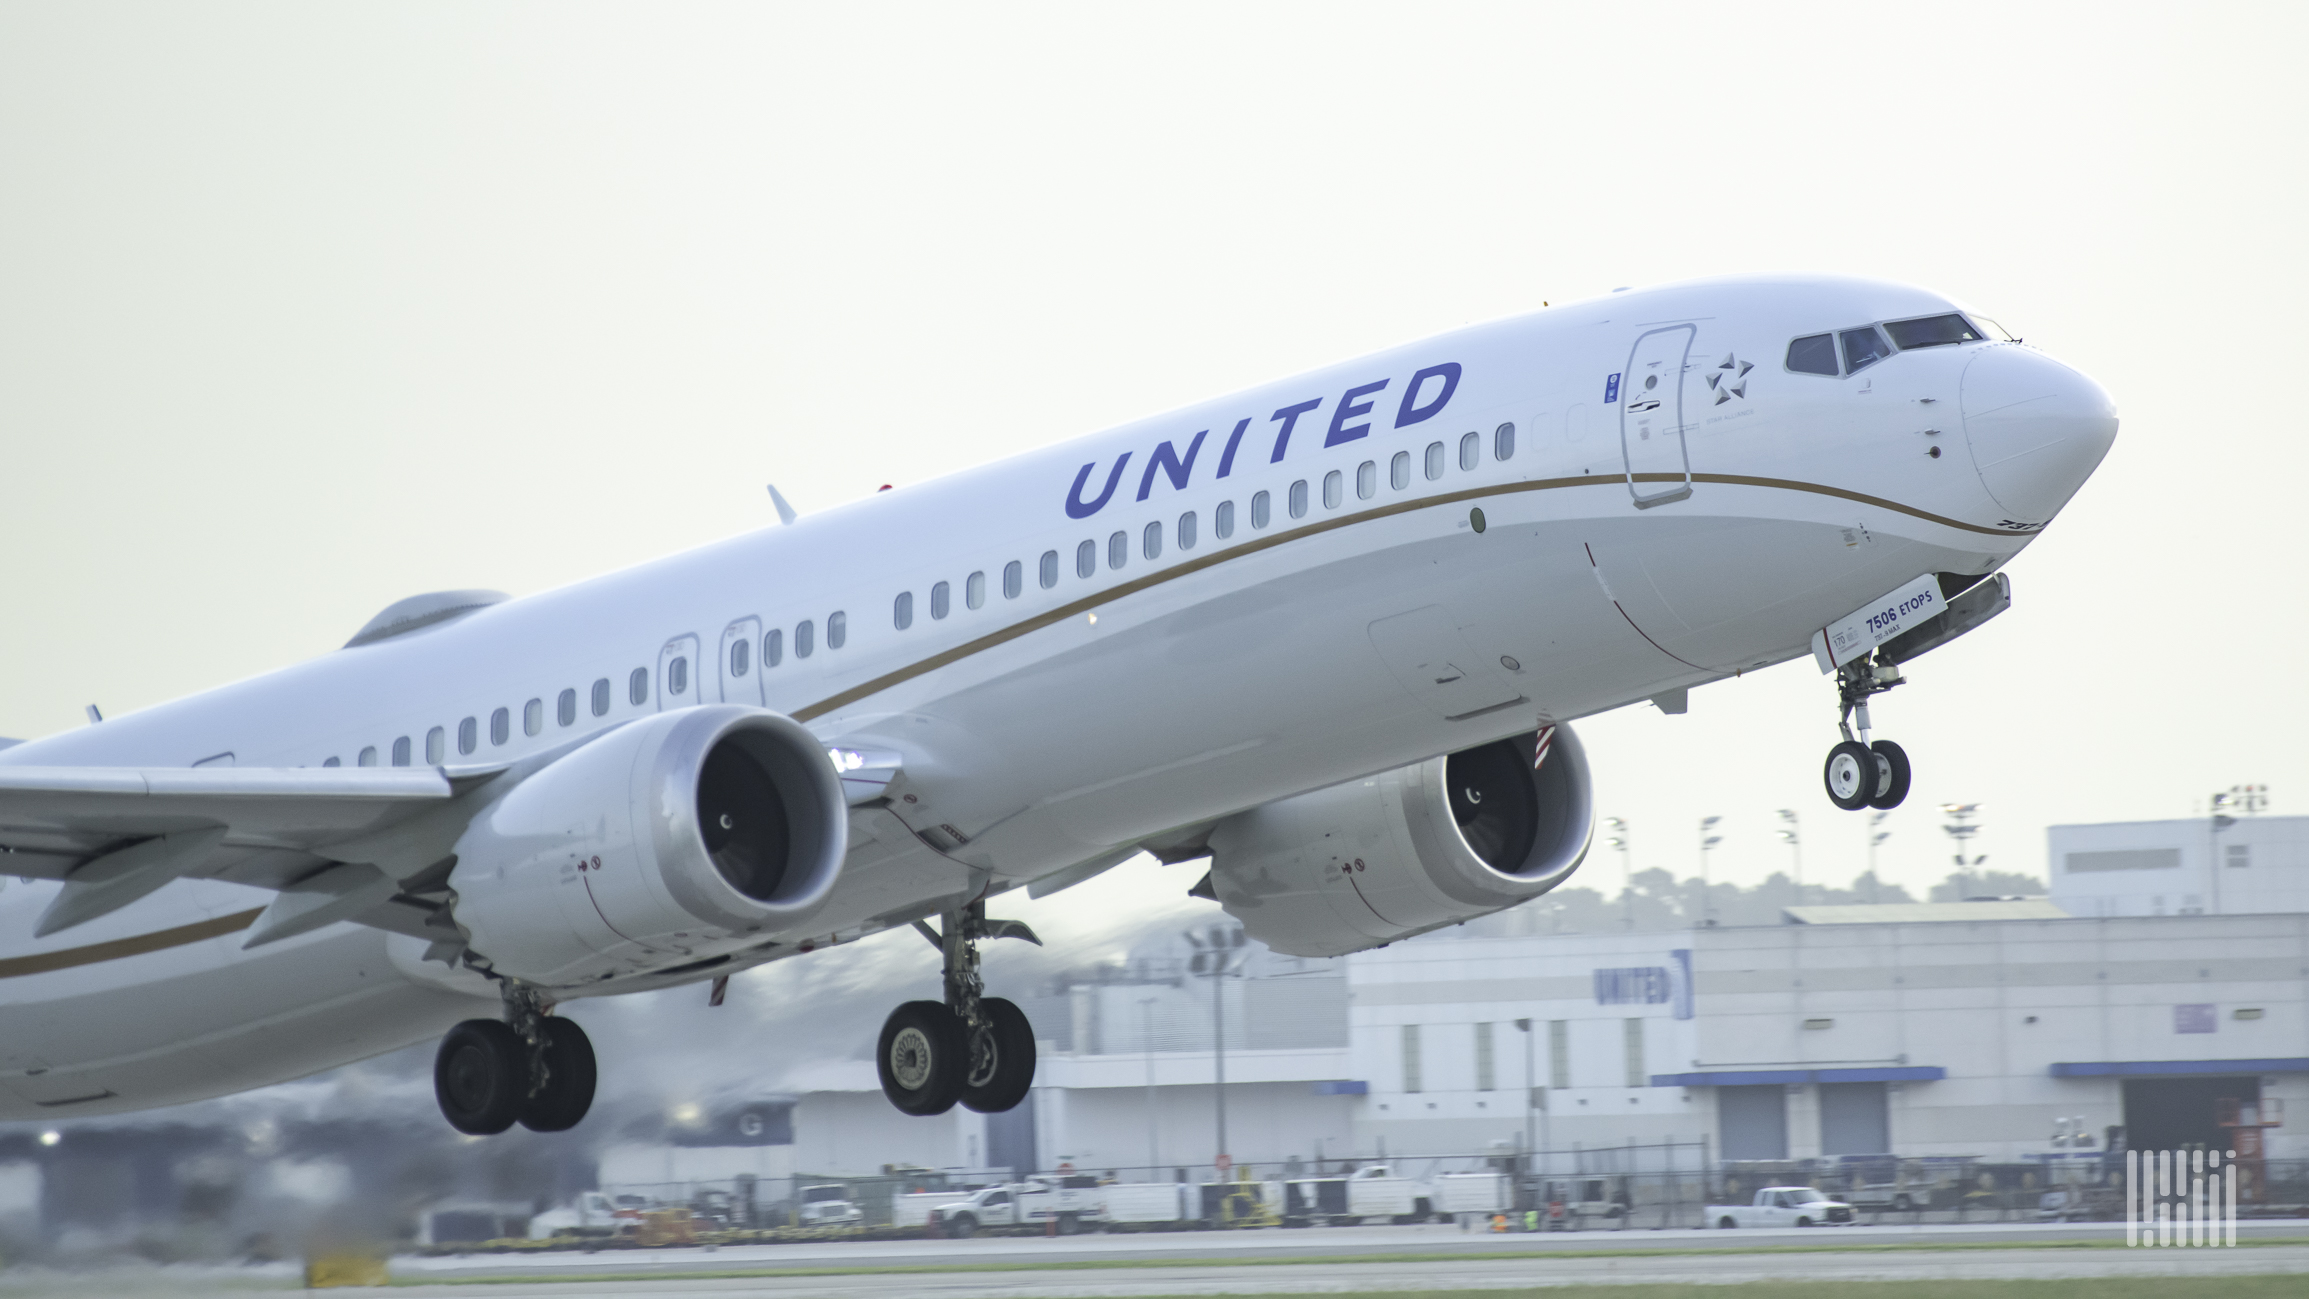 A close up of a white United Airlines jet taking off.